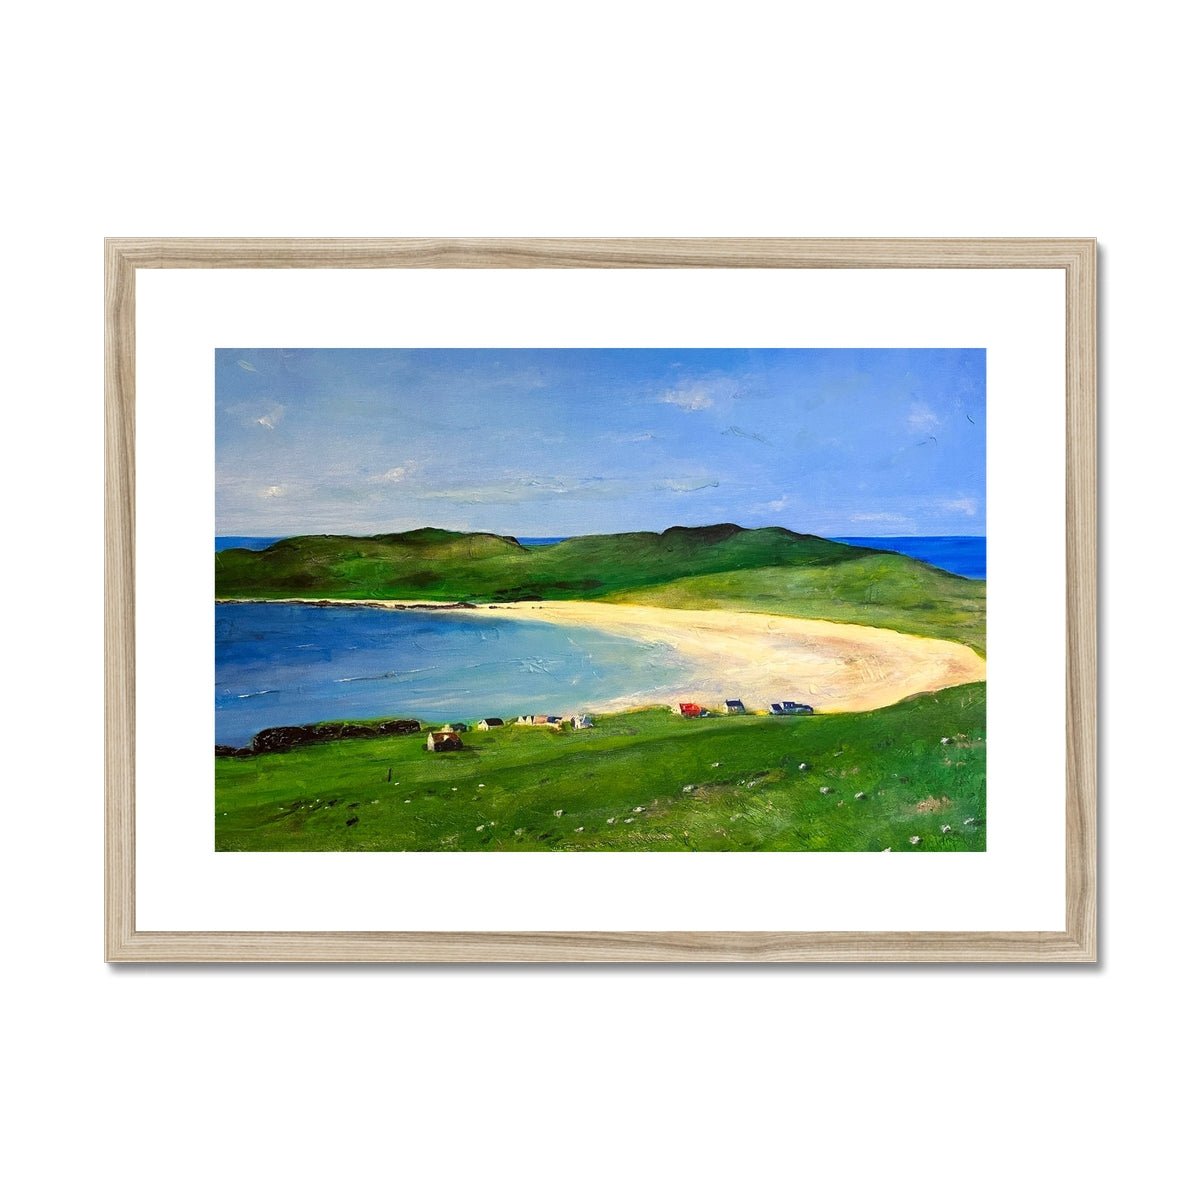 Balephuil Beach Tiree Painting | Framed & Mounted Prints From Scotland-Framed & Mounted Prints-Hebridean Islands Art Gallery-A2 Landscape-Natural Frame-Paintings, Prints, Homeware, Art Gifts From Scotland By Scottish Artist Kevin Hunter